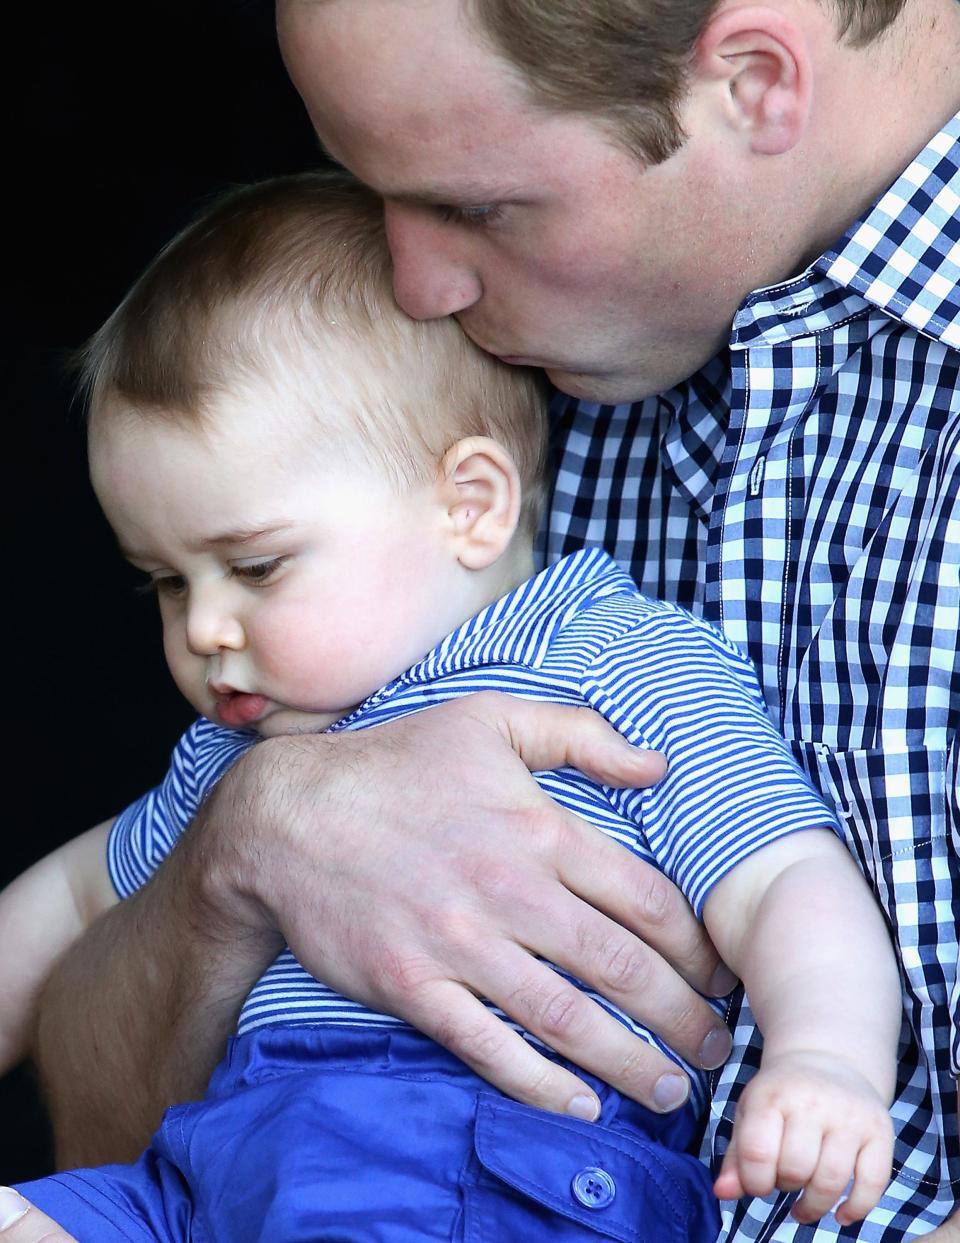 Prince William and Prince George at Taronga Zoo on April 20, 2014 in Sydney, Australia.